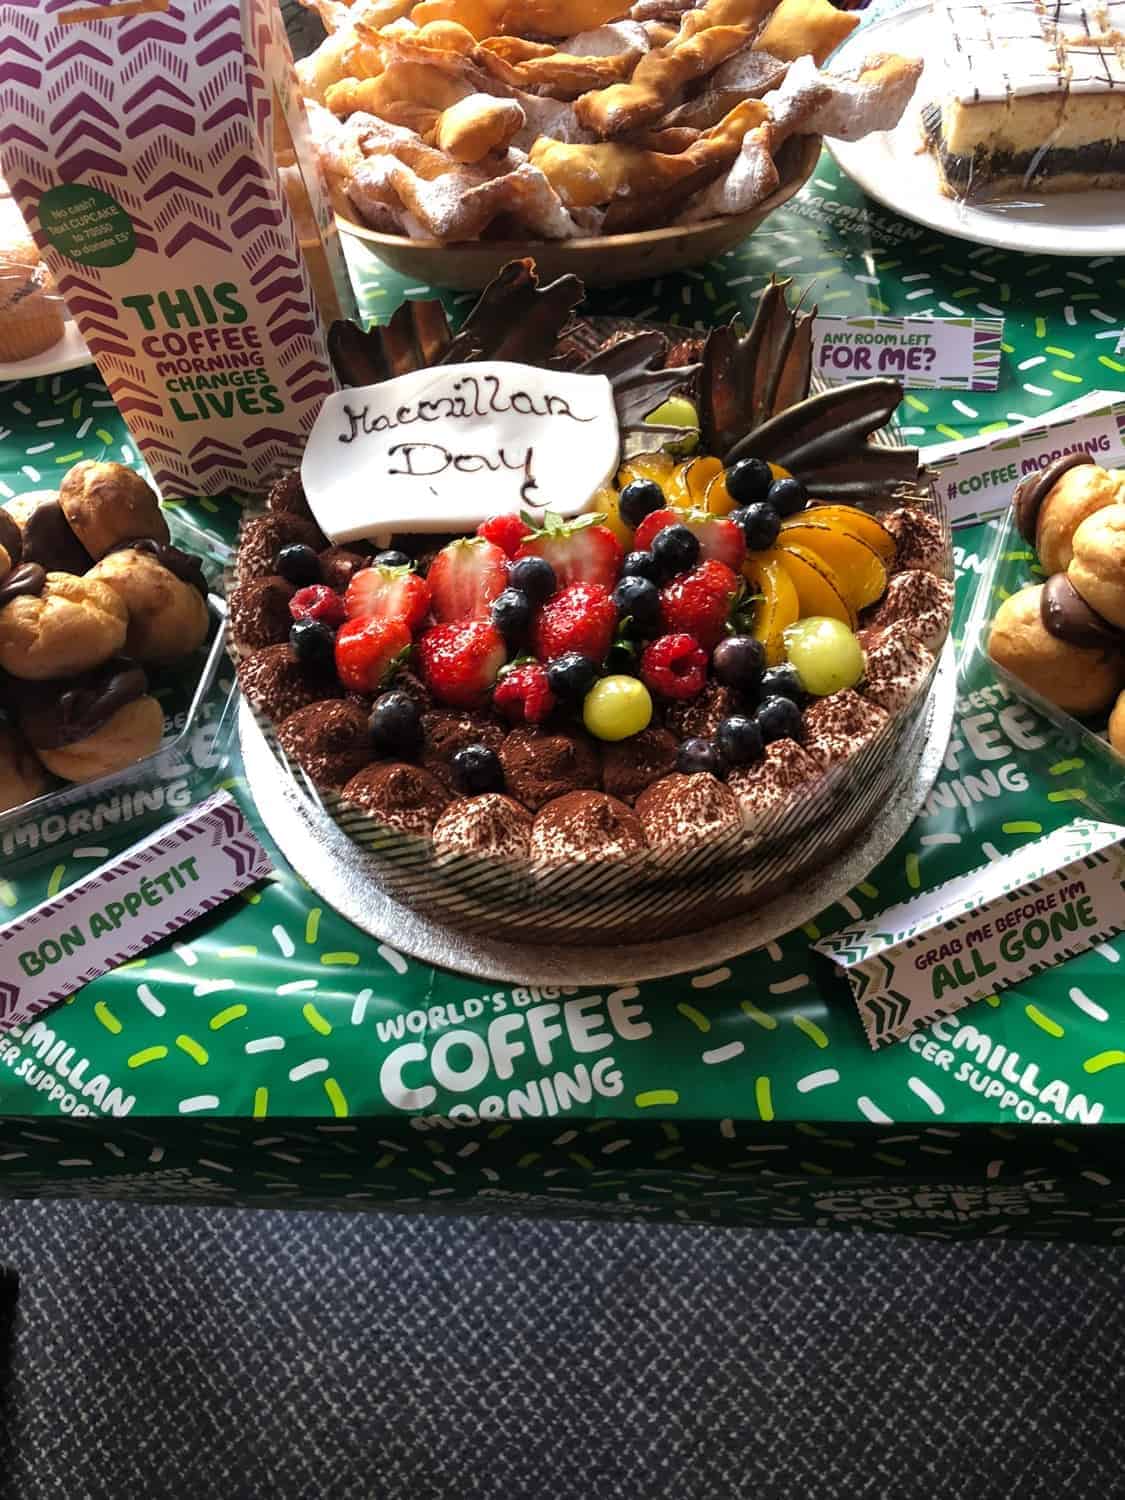 A richly garnished chocolate tart topped with an assortment of fresh strawberries, blueberries, and blackberries, with a small white plaque that reads "happy birthday," surrounded by a gallery of baked treats